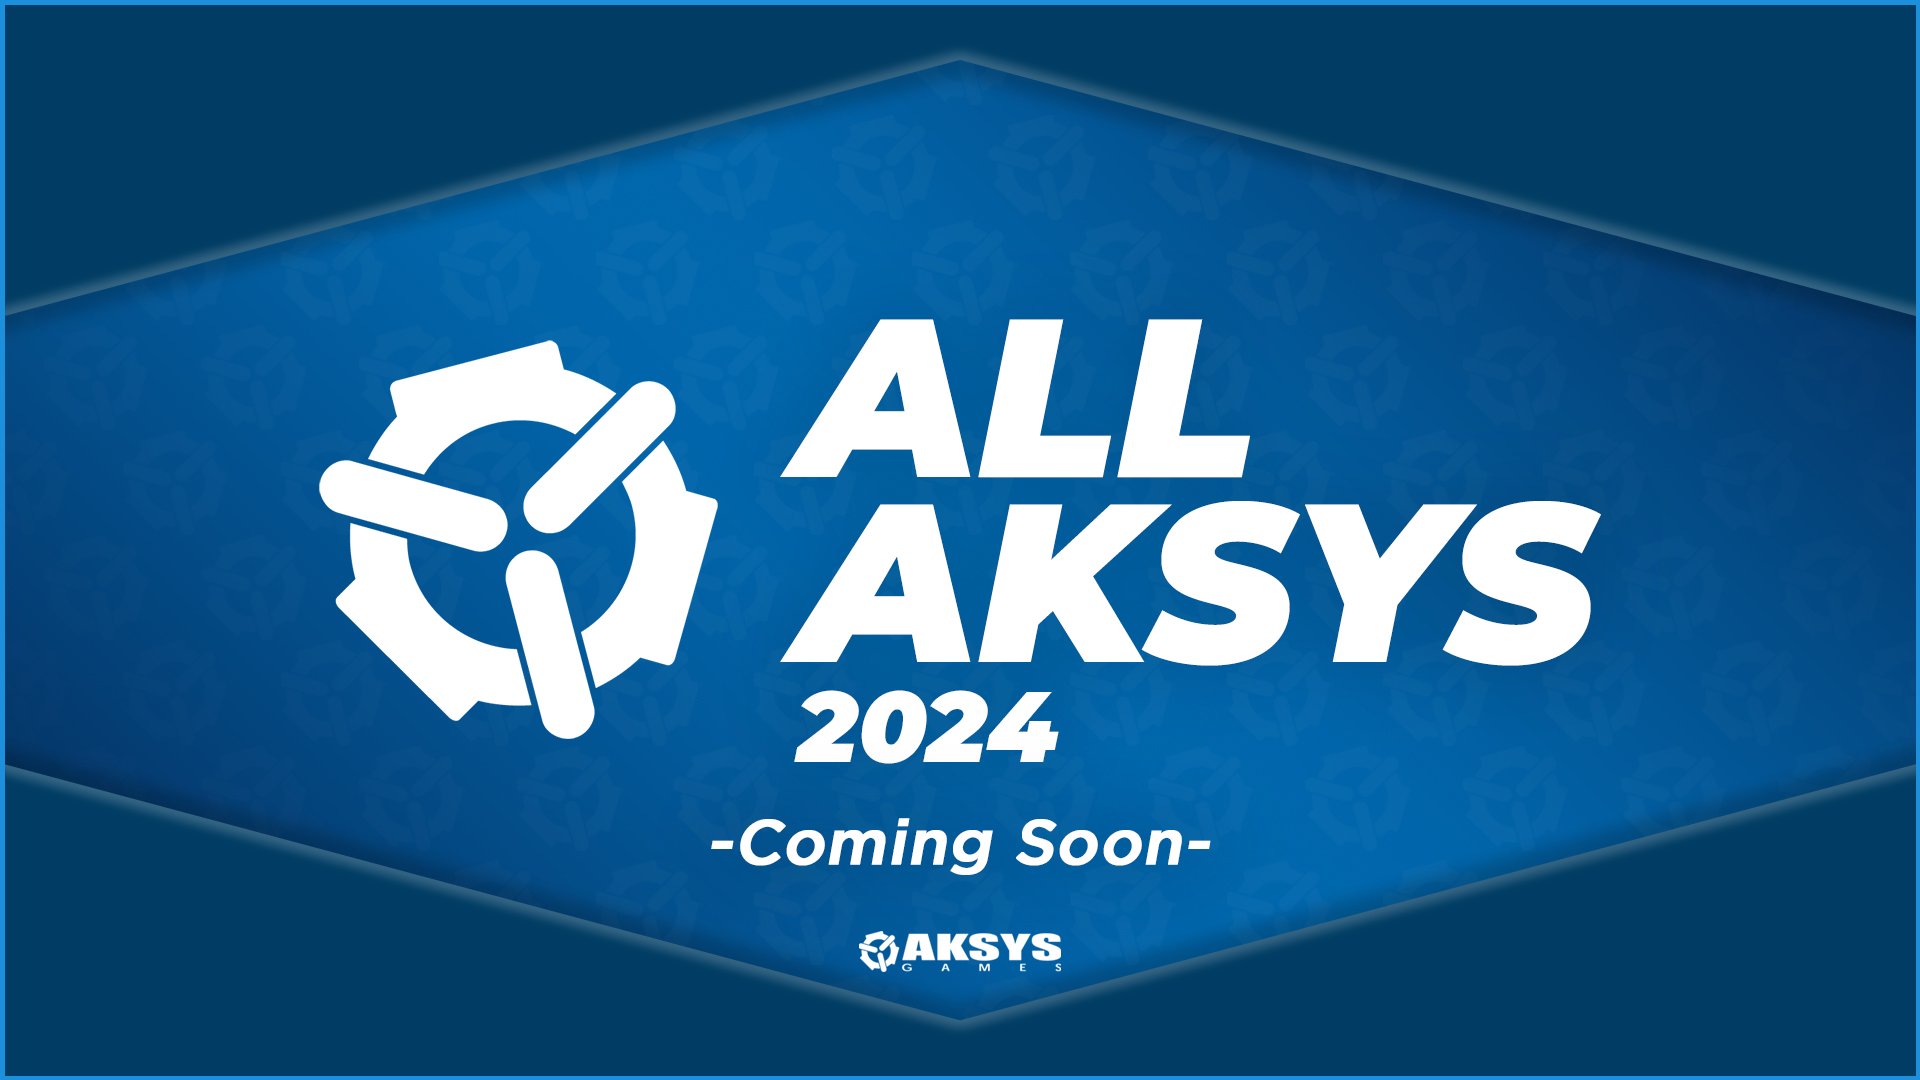 Event All Aksys 2024 Live Stream set for February 1 Updates and new